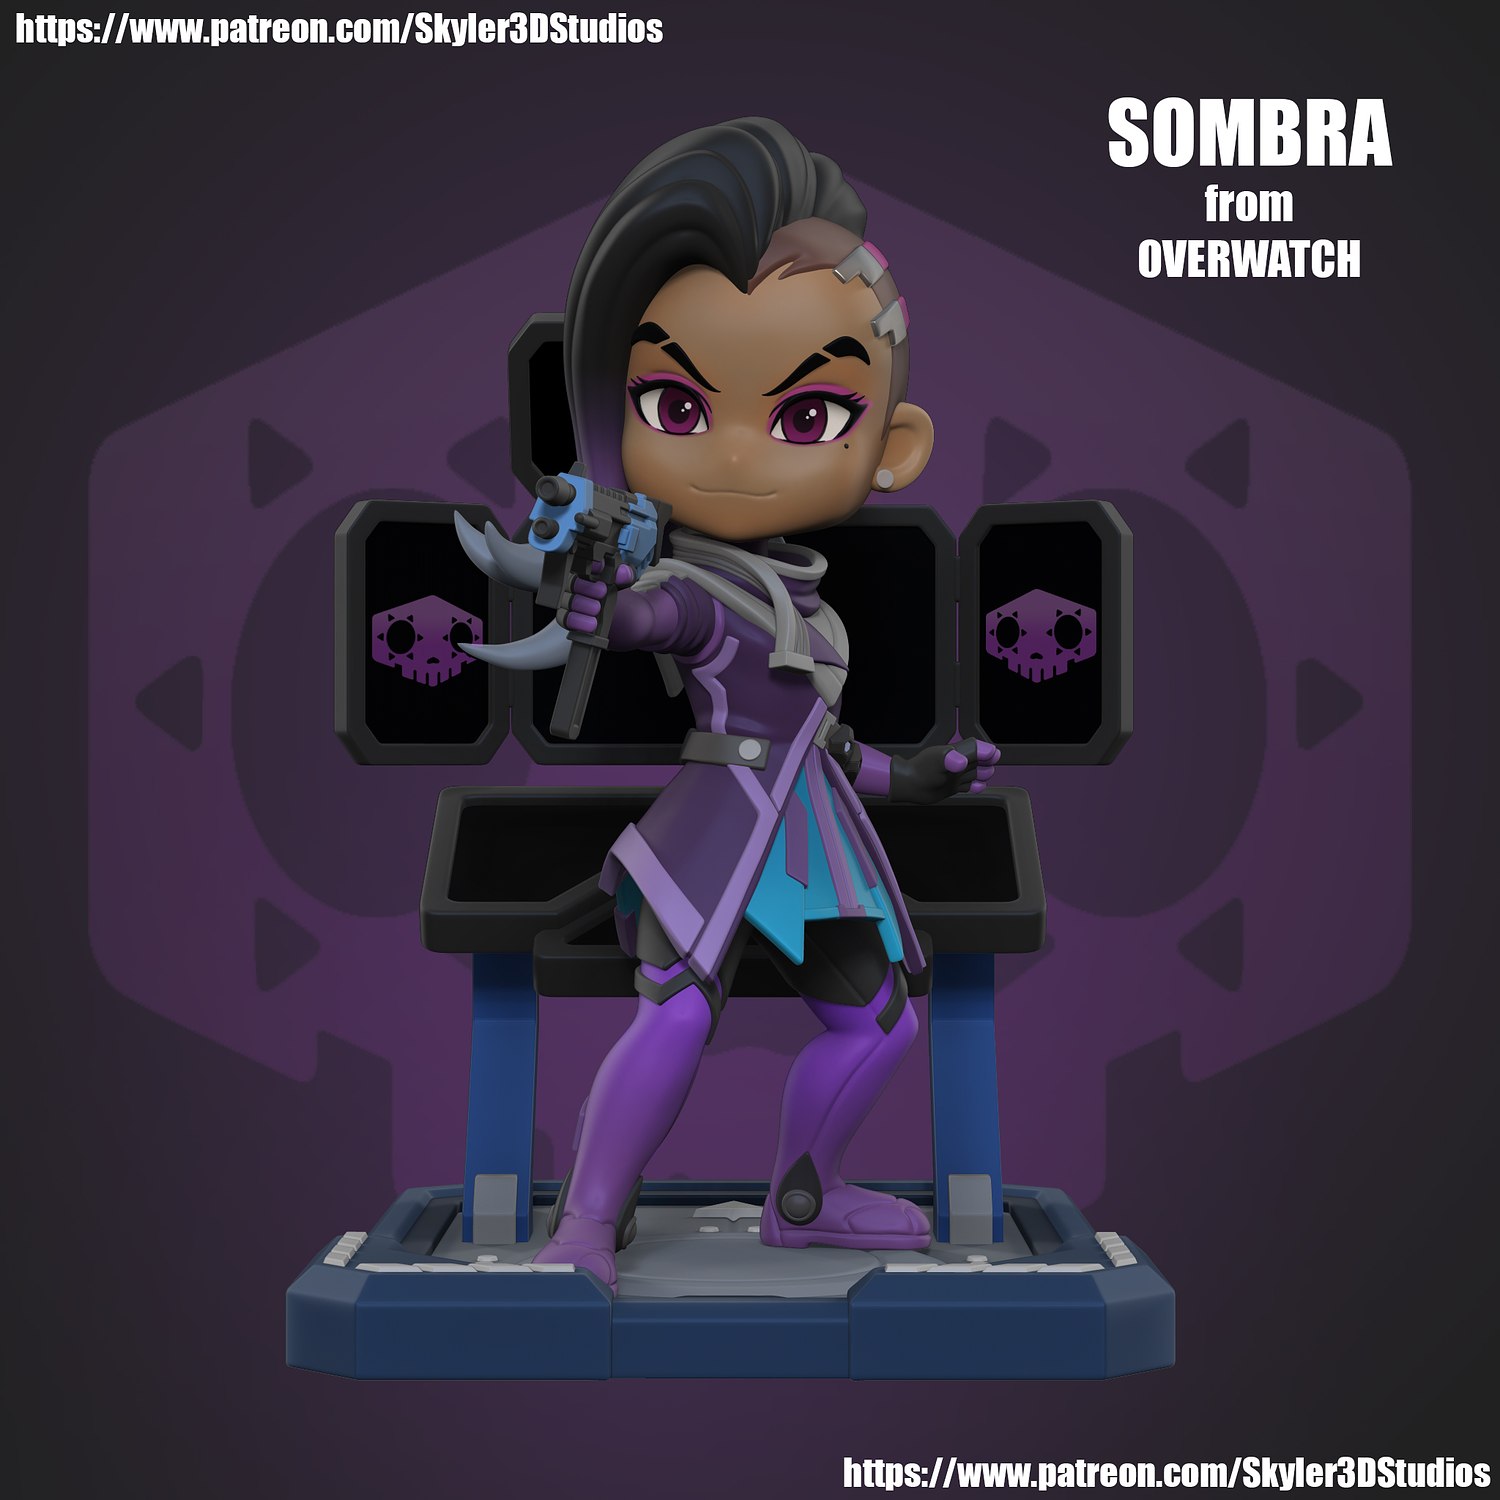 Sombra from Overwatch Stylized Version